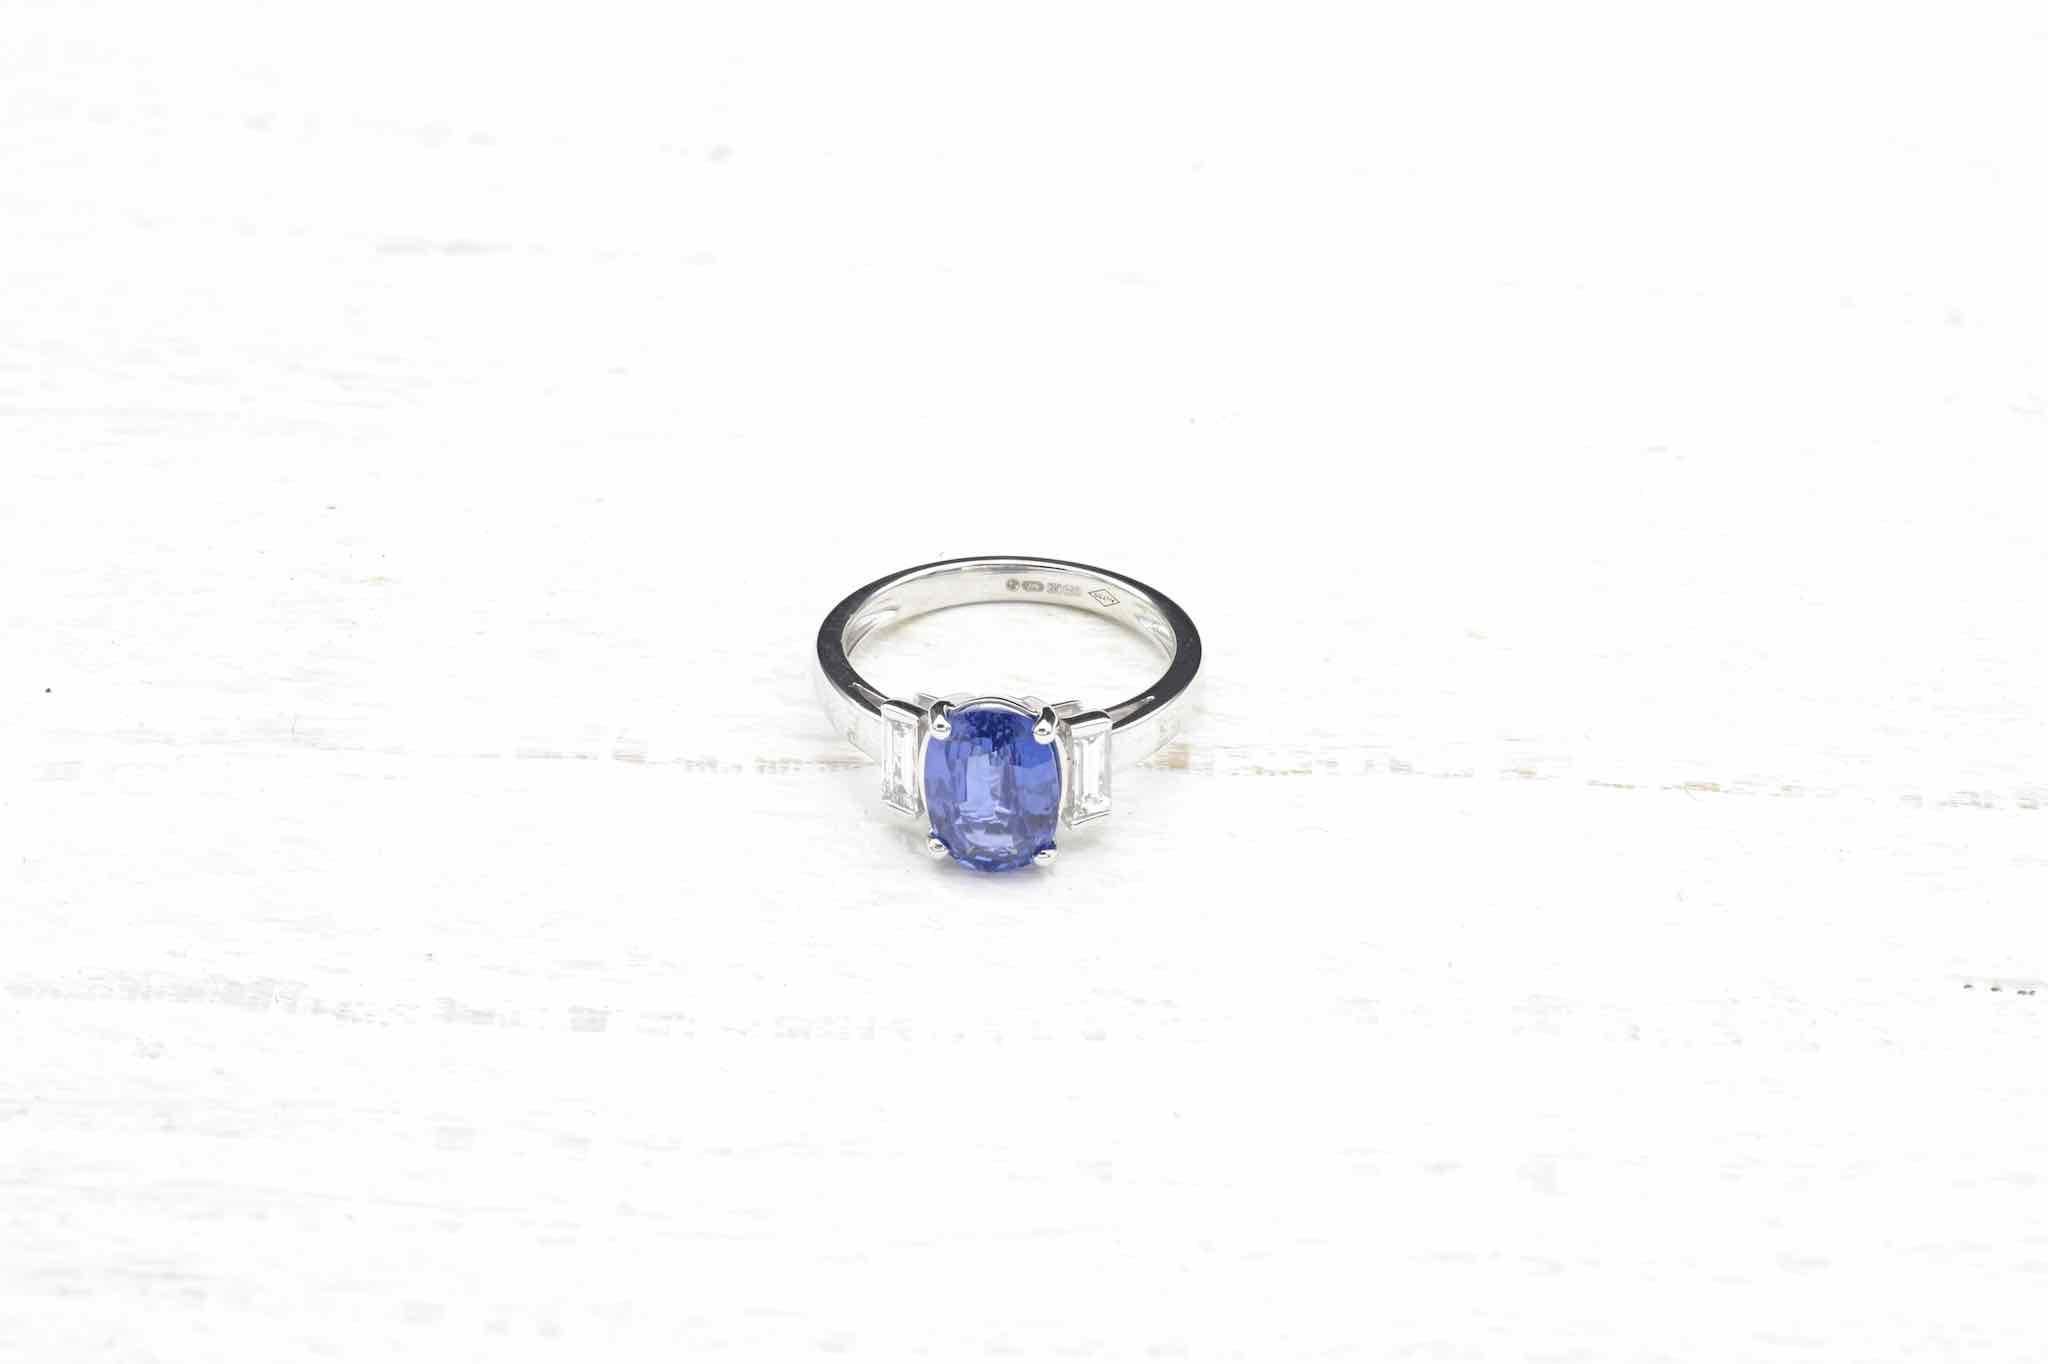 Stones: 2.42 carats Ceylon Sapphire (heated)
and baguette diamonds for a total weight of 0.27 carats.
Material: 18k white gold
Dimensions: 9 mm length on finger
Weight: 3.8g
Size: 53 (free sizing)
Certificate
Ref. : 23774 / 23789